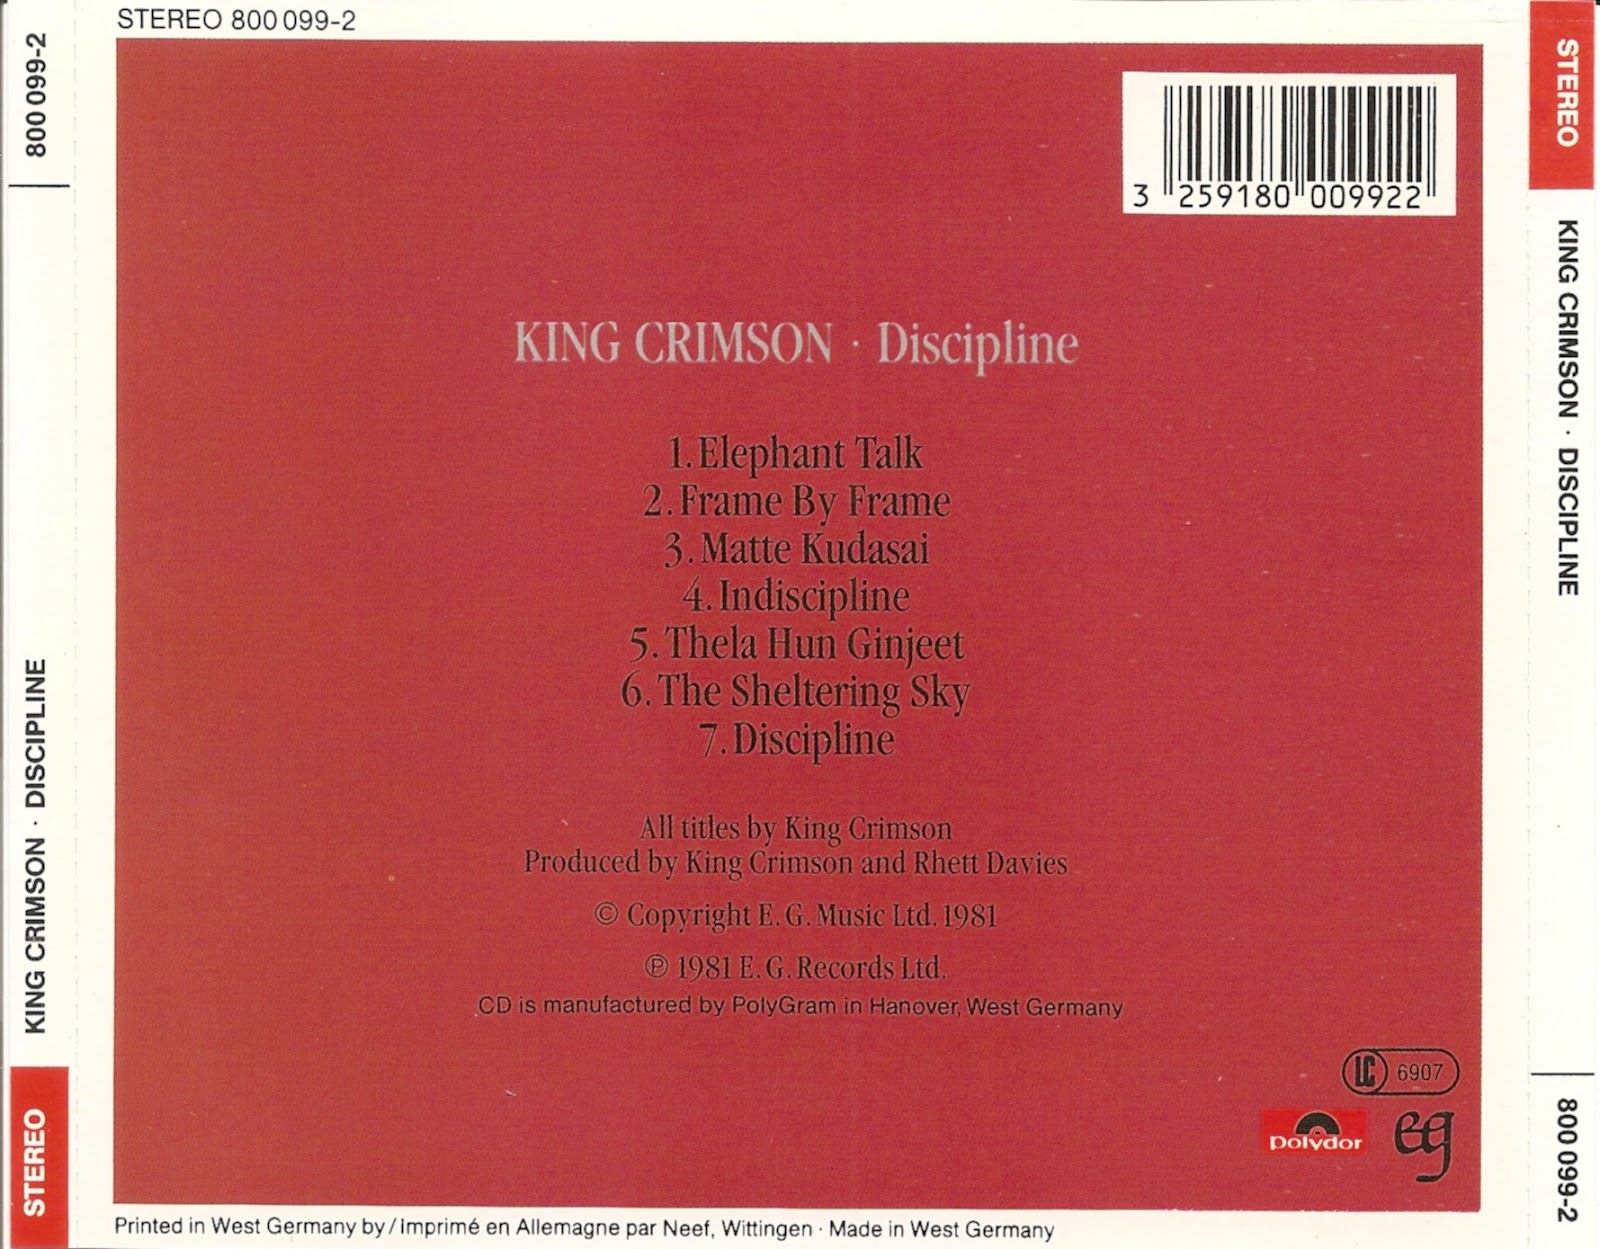 The First Pressing CD Collection: King Crimson - Discipline